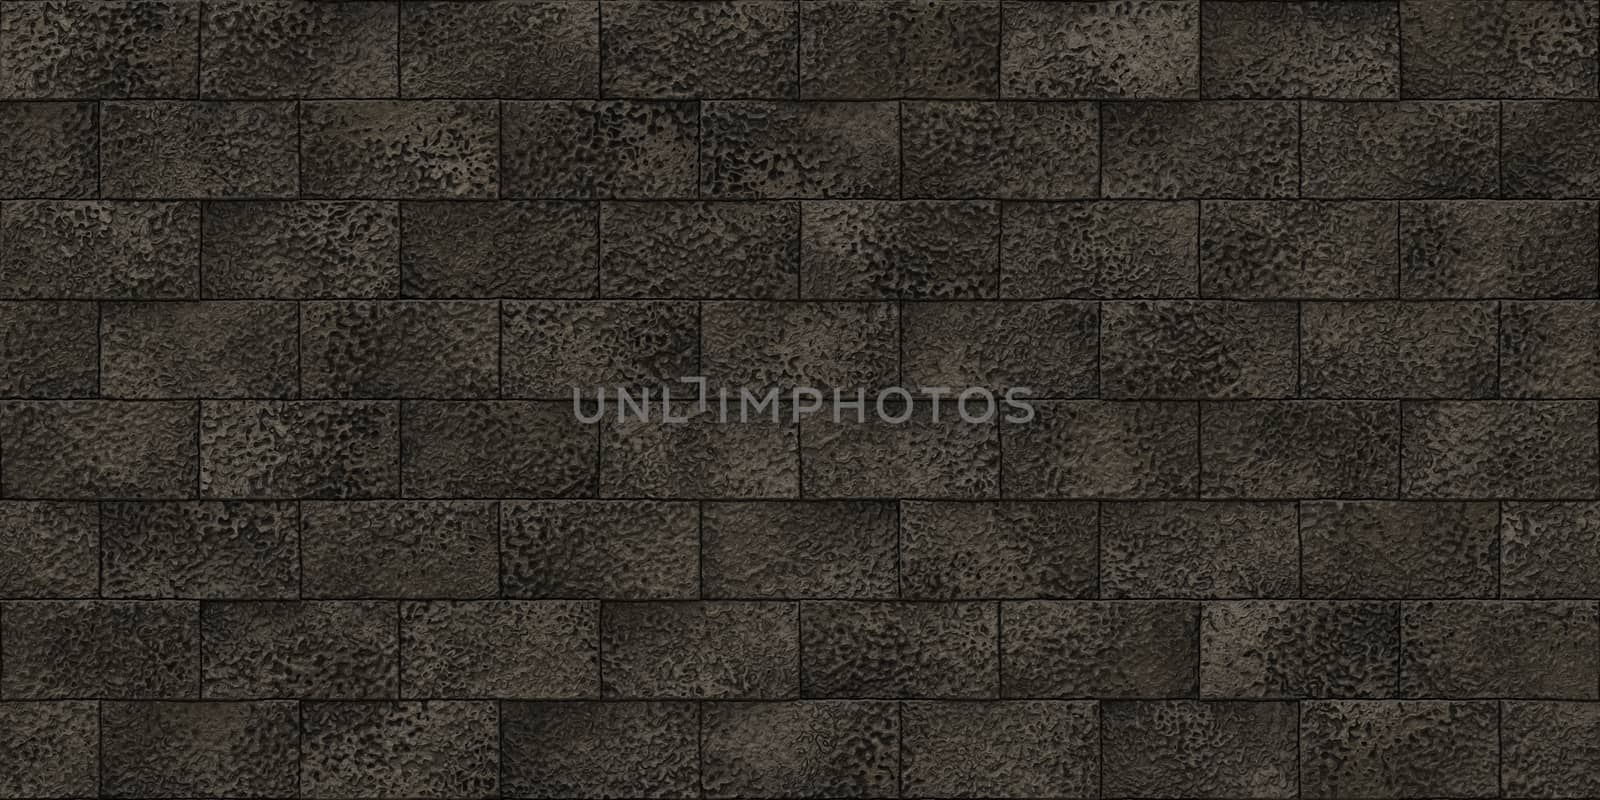 Dark Brown Seamless Stone Block Wall Texture. Building Facade Background. Exterior Architecture Decorative House Facing.